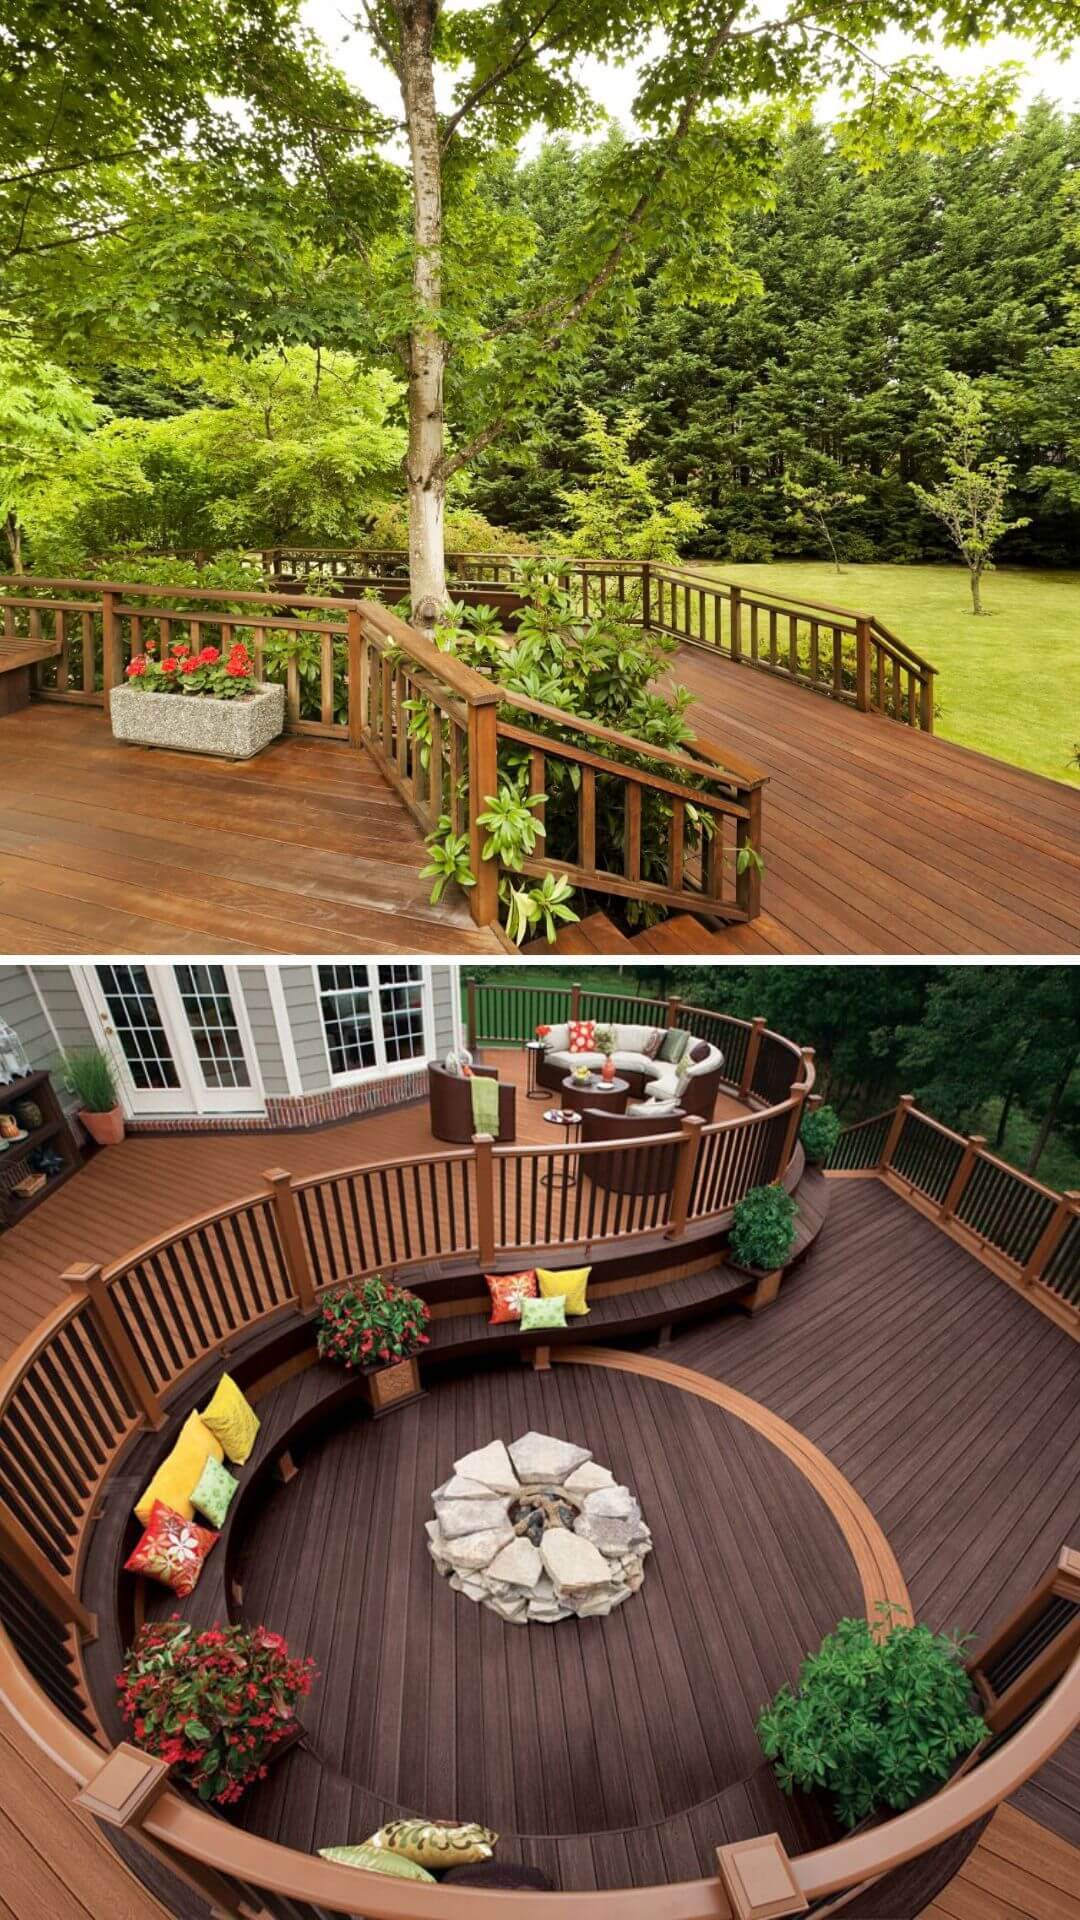 15+ inexpensive diy deck ideas to spice up your outdoor patio